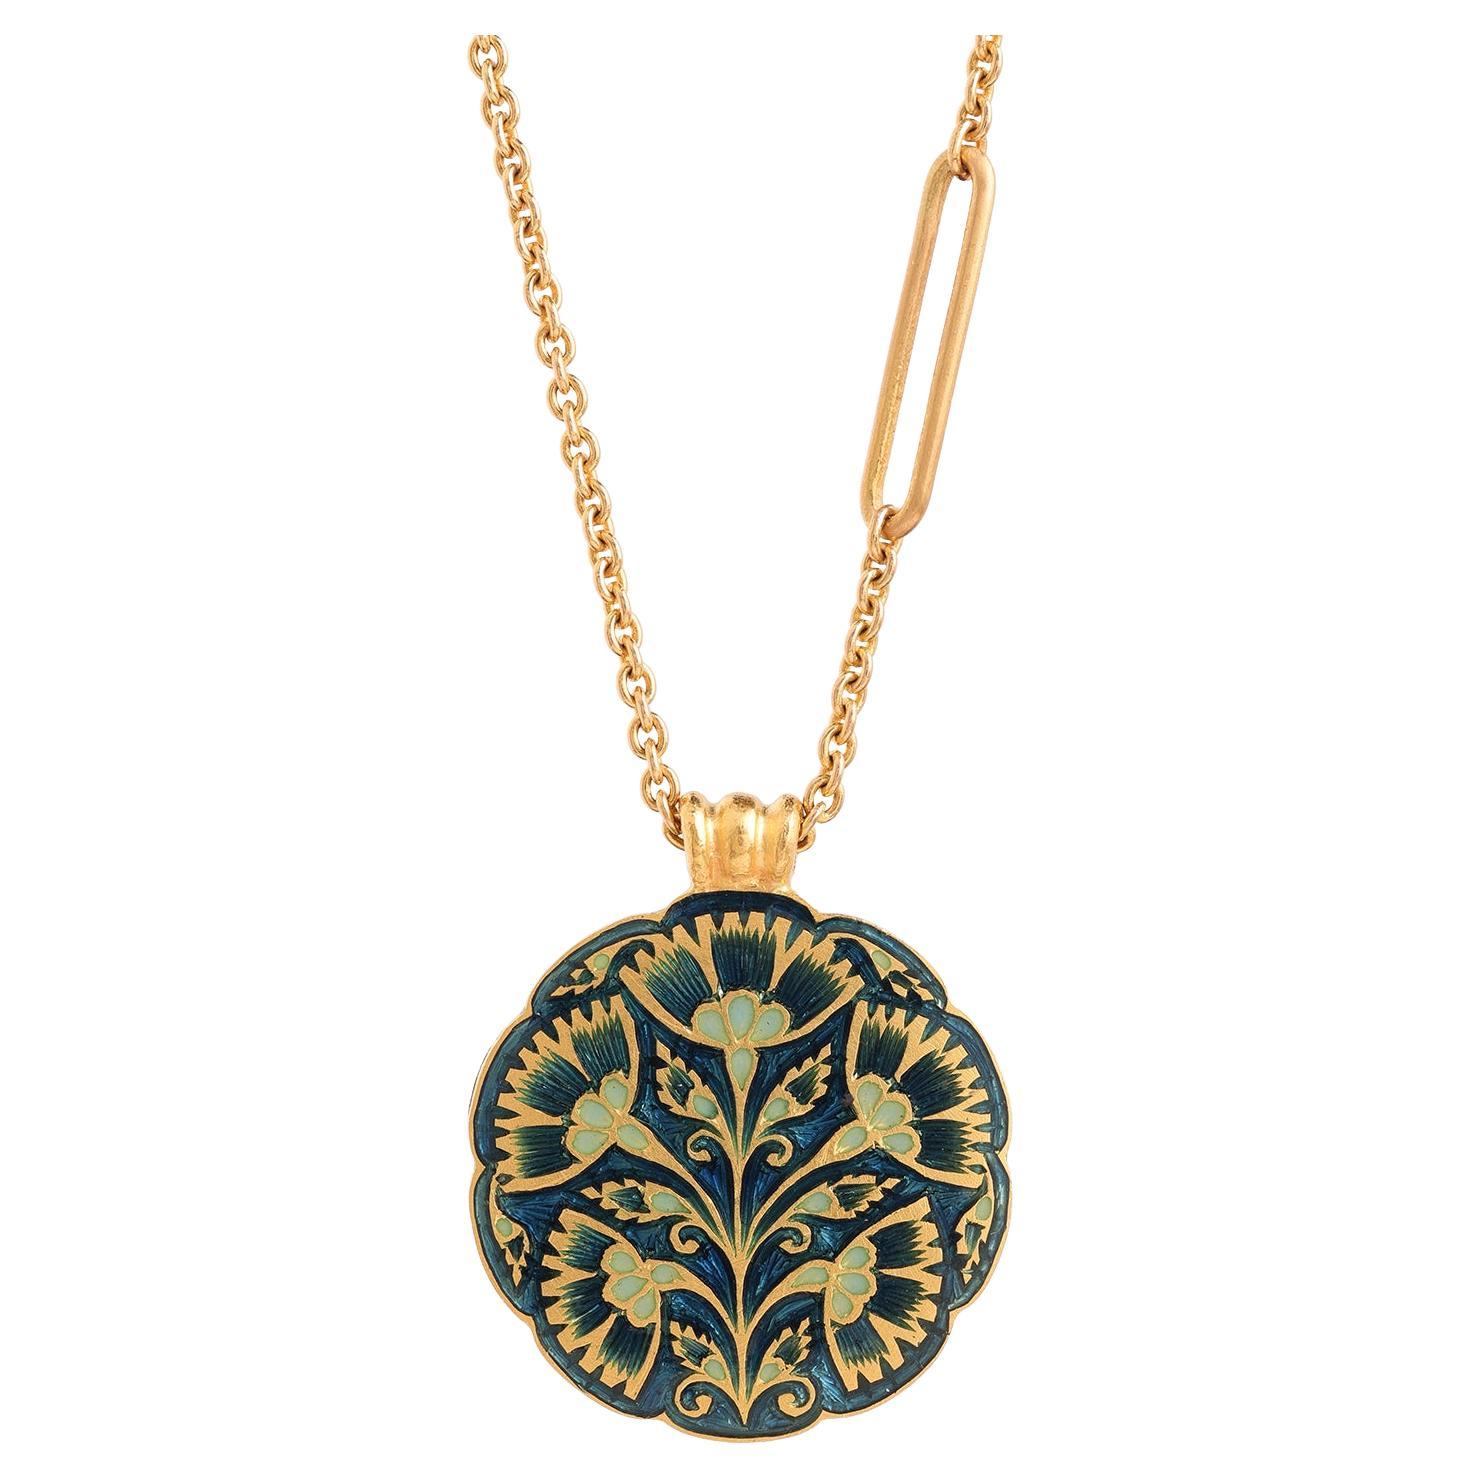 Women's or Men's 22K Gold and Blue and Green Floral Enamel Pendant Necklace Handmade by Agaro For Sale